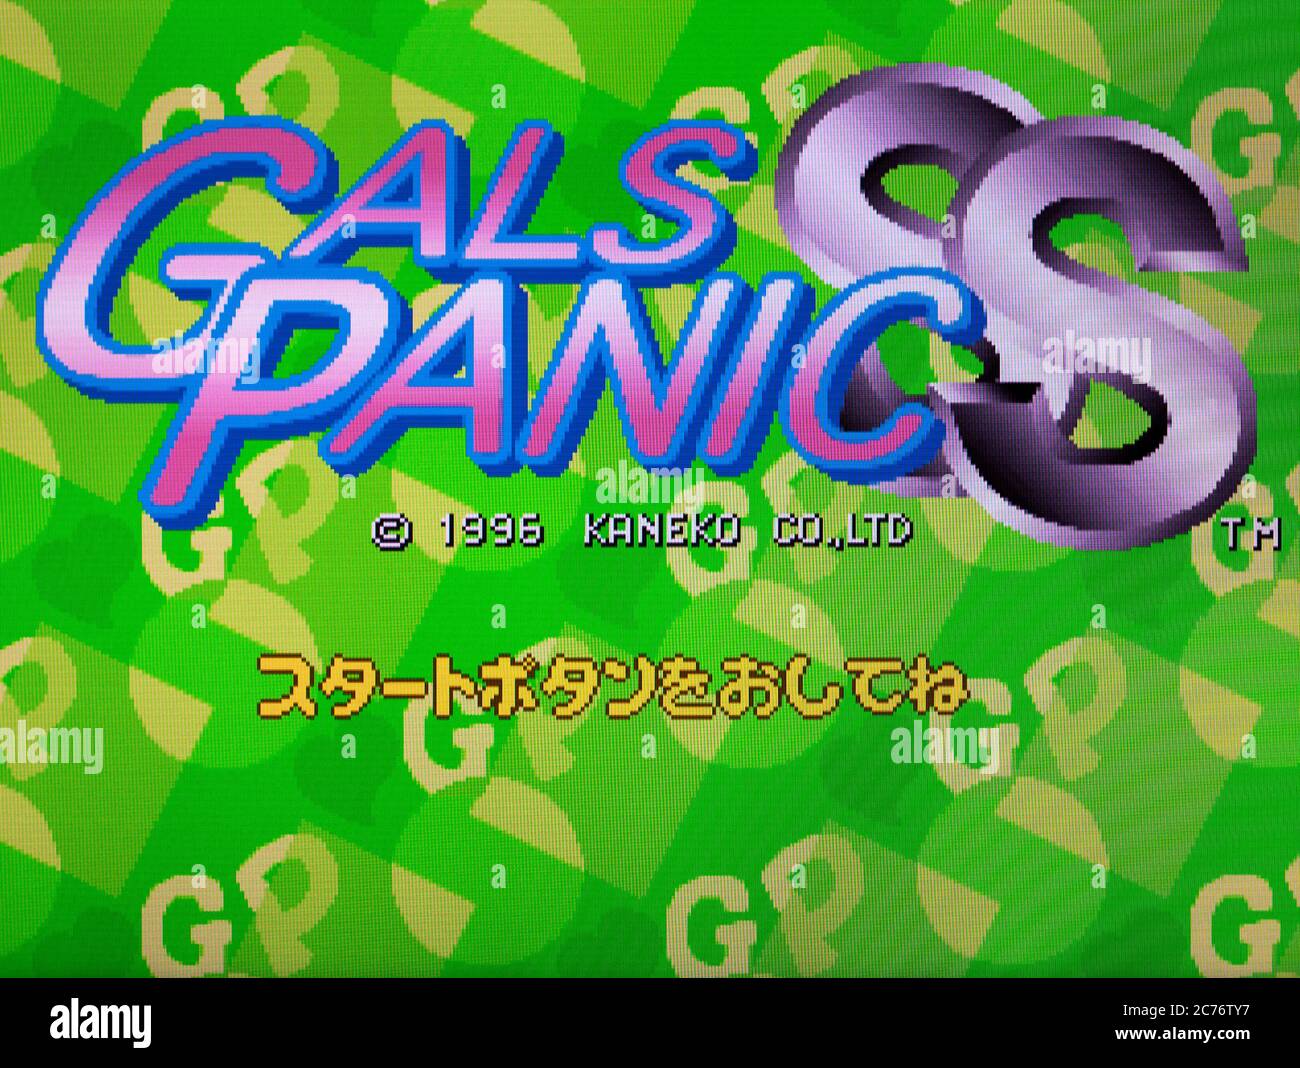 Gals Panic SS - Sega Saturn Videogame - Editorial use only Stock Photo